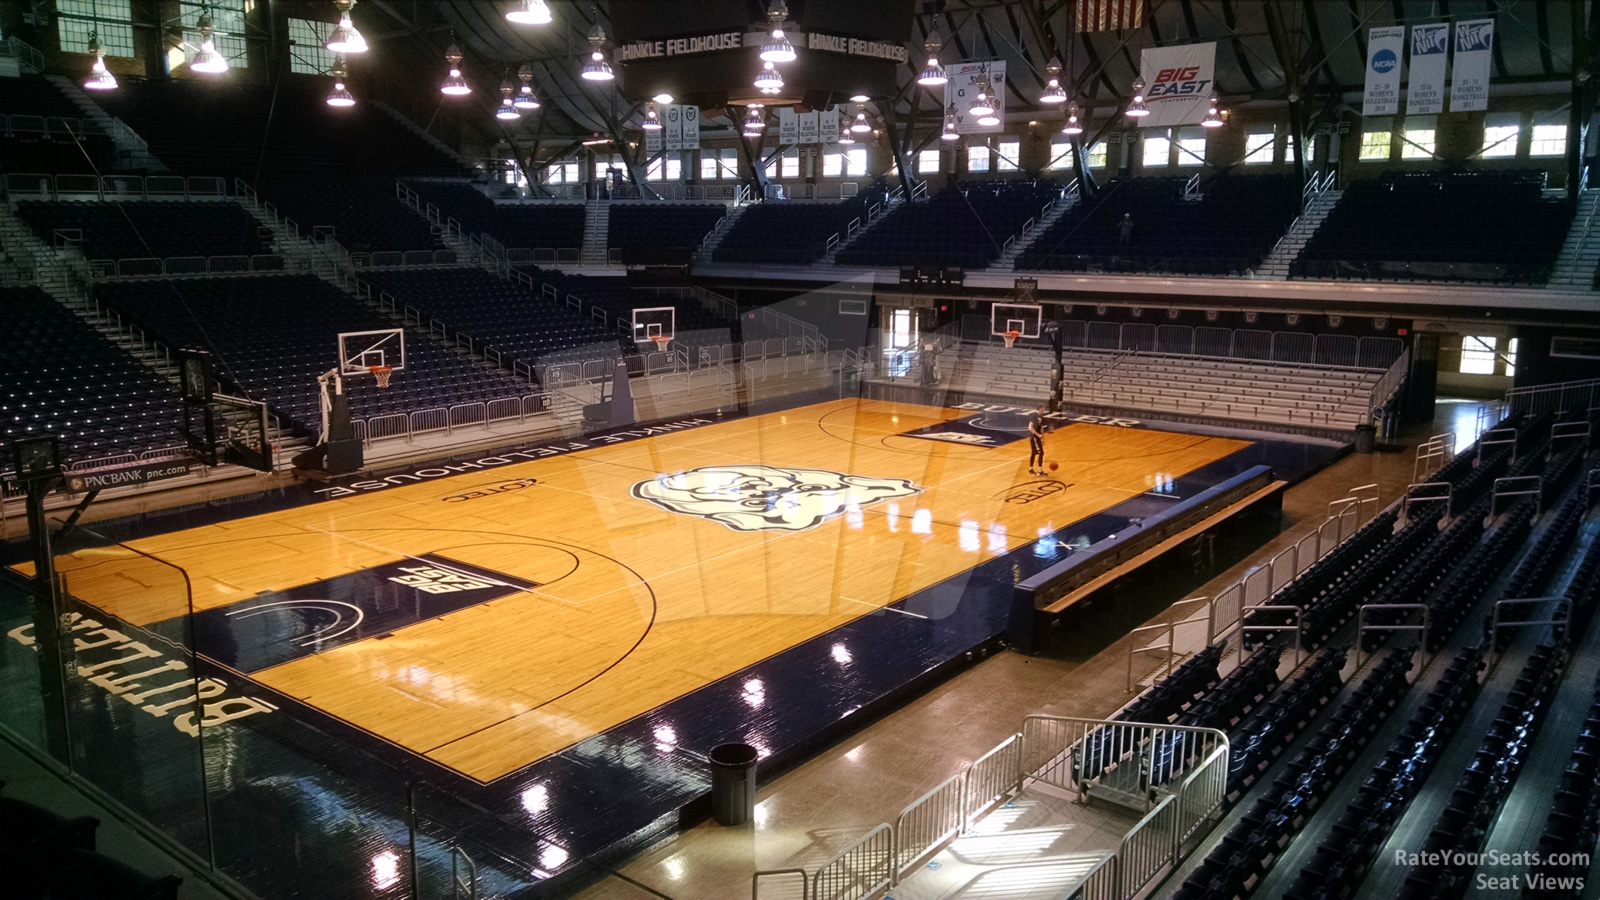 section 210, row 3 seat view  - hinkle fieldhouse